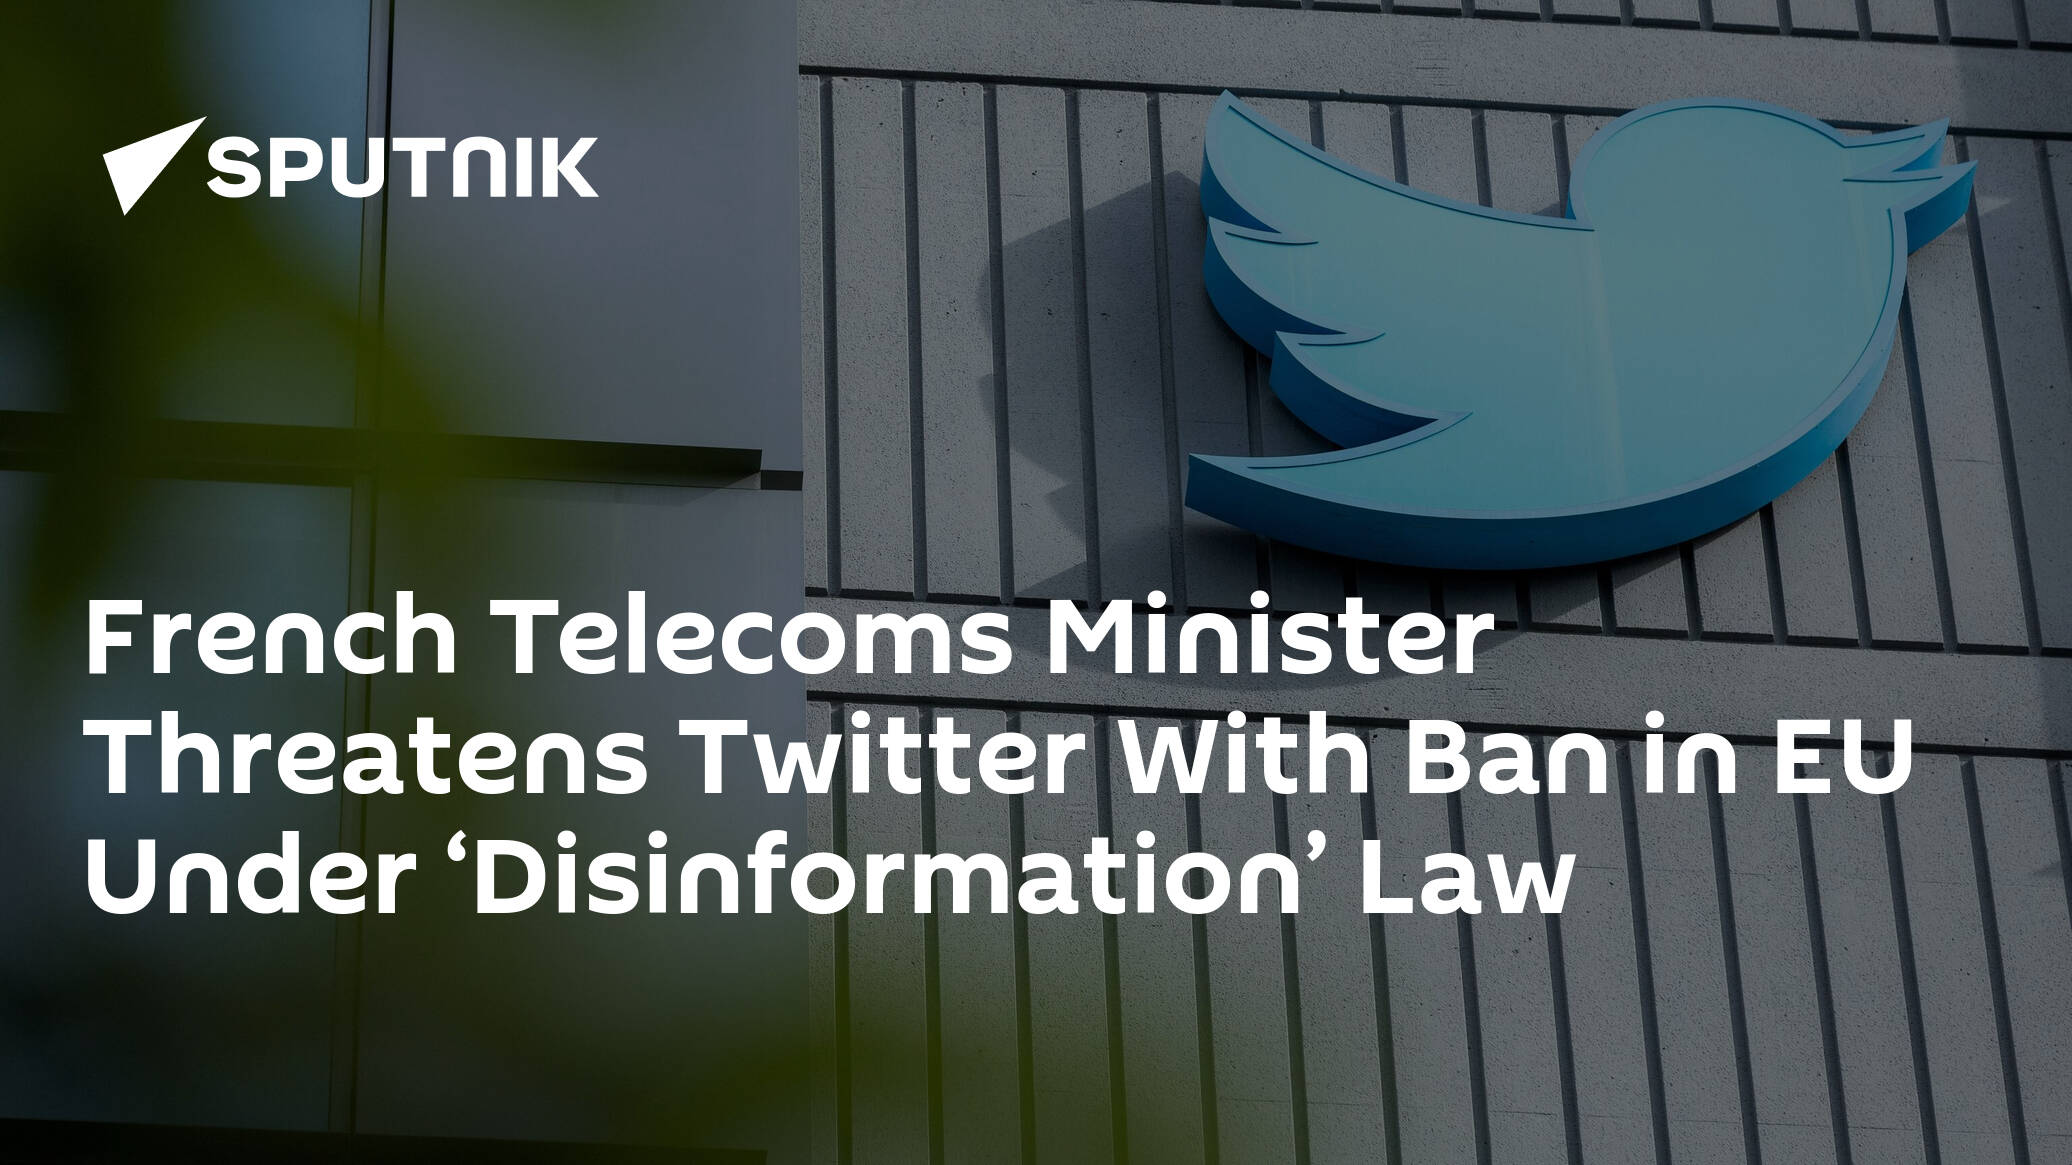 French Telecoms Minister Threatens Twitter With Ban in EU Under ‘Disinformation’ Law